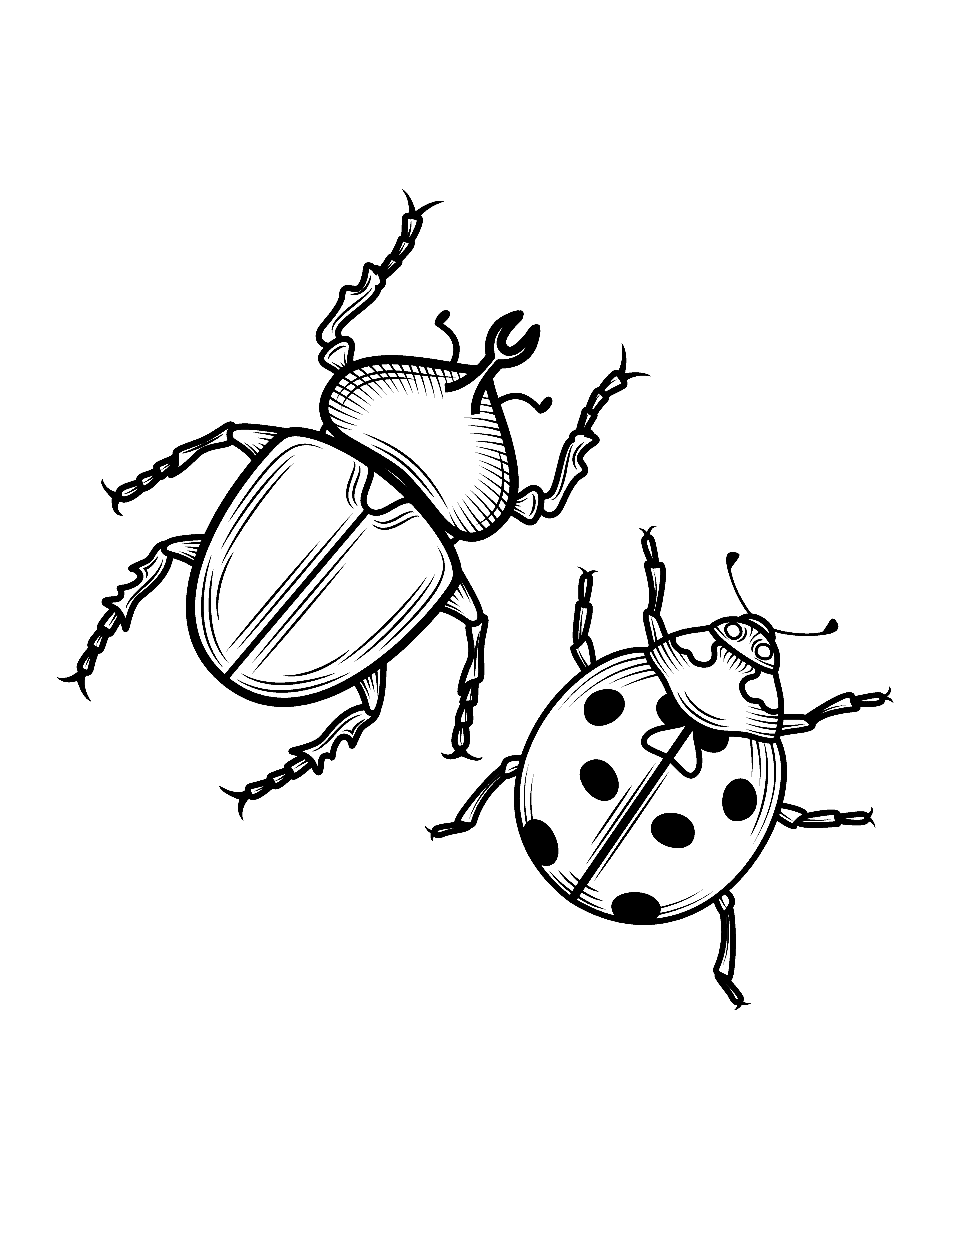 Beetle and Ladybug Side by Side Coloring Page - A ladybug and a beetle standing side by side.